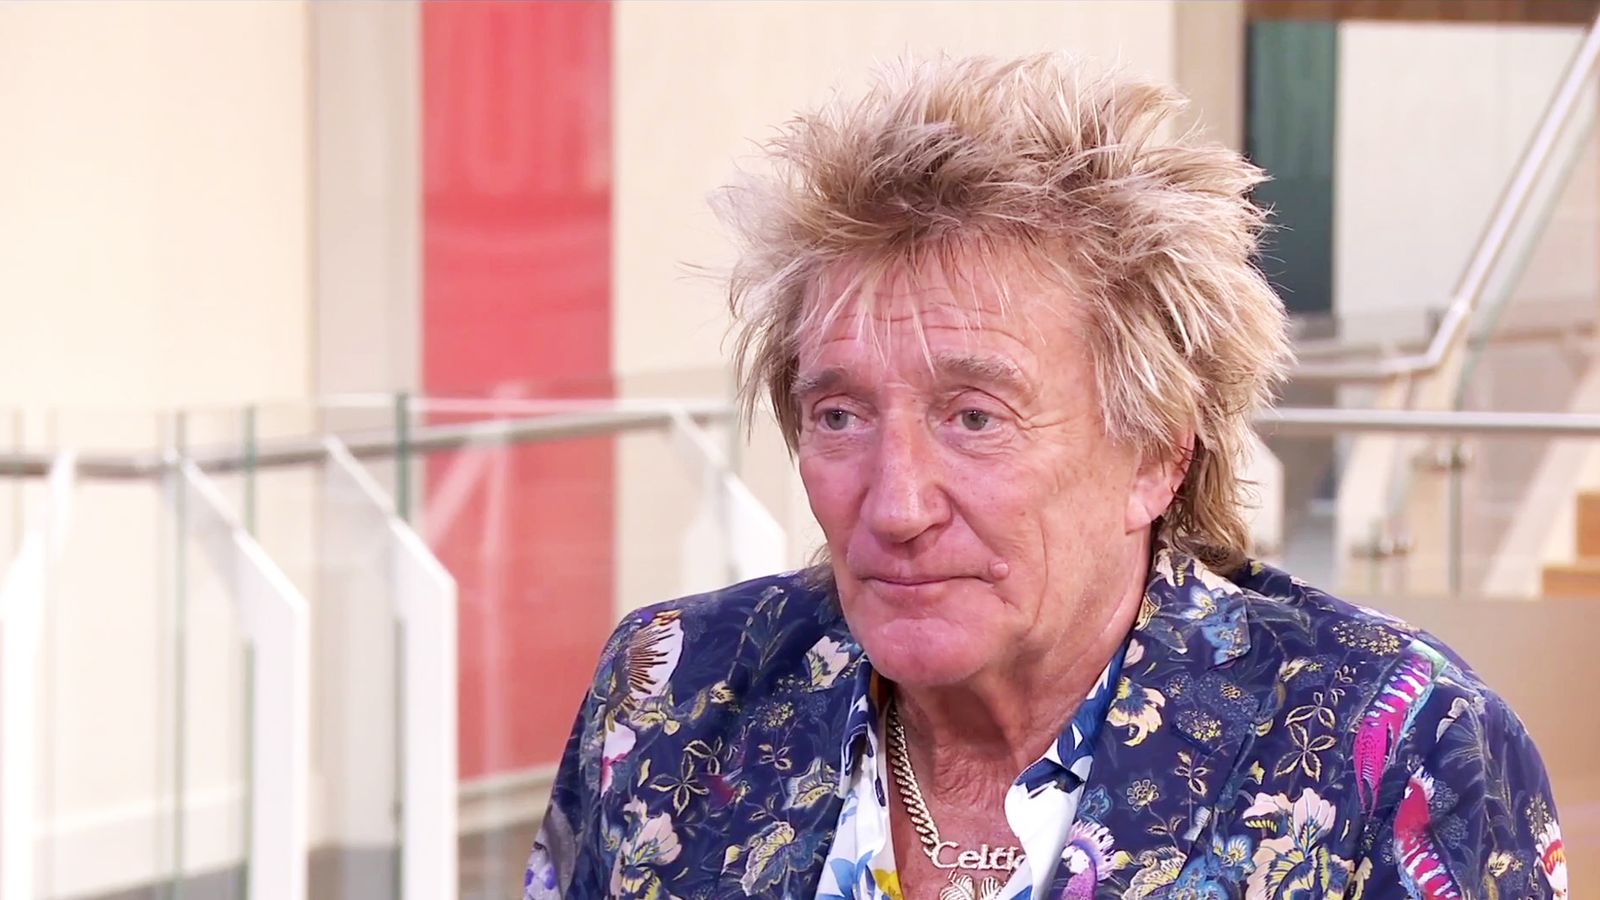 Sir Rod Stewart says Labour 'deserve a crack' at running the country, Politics News